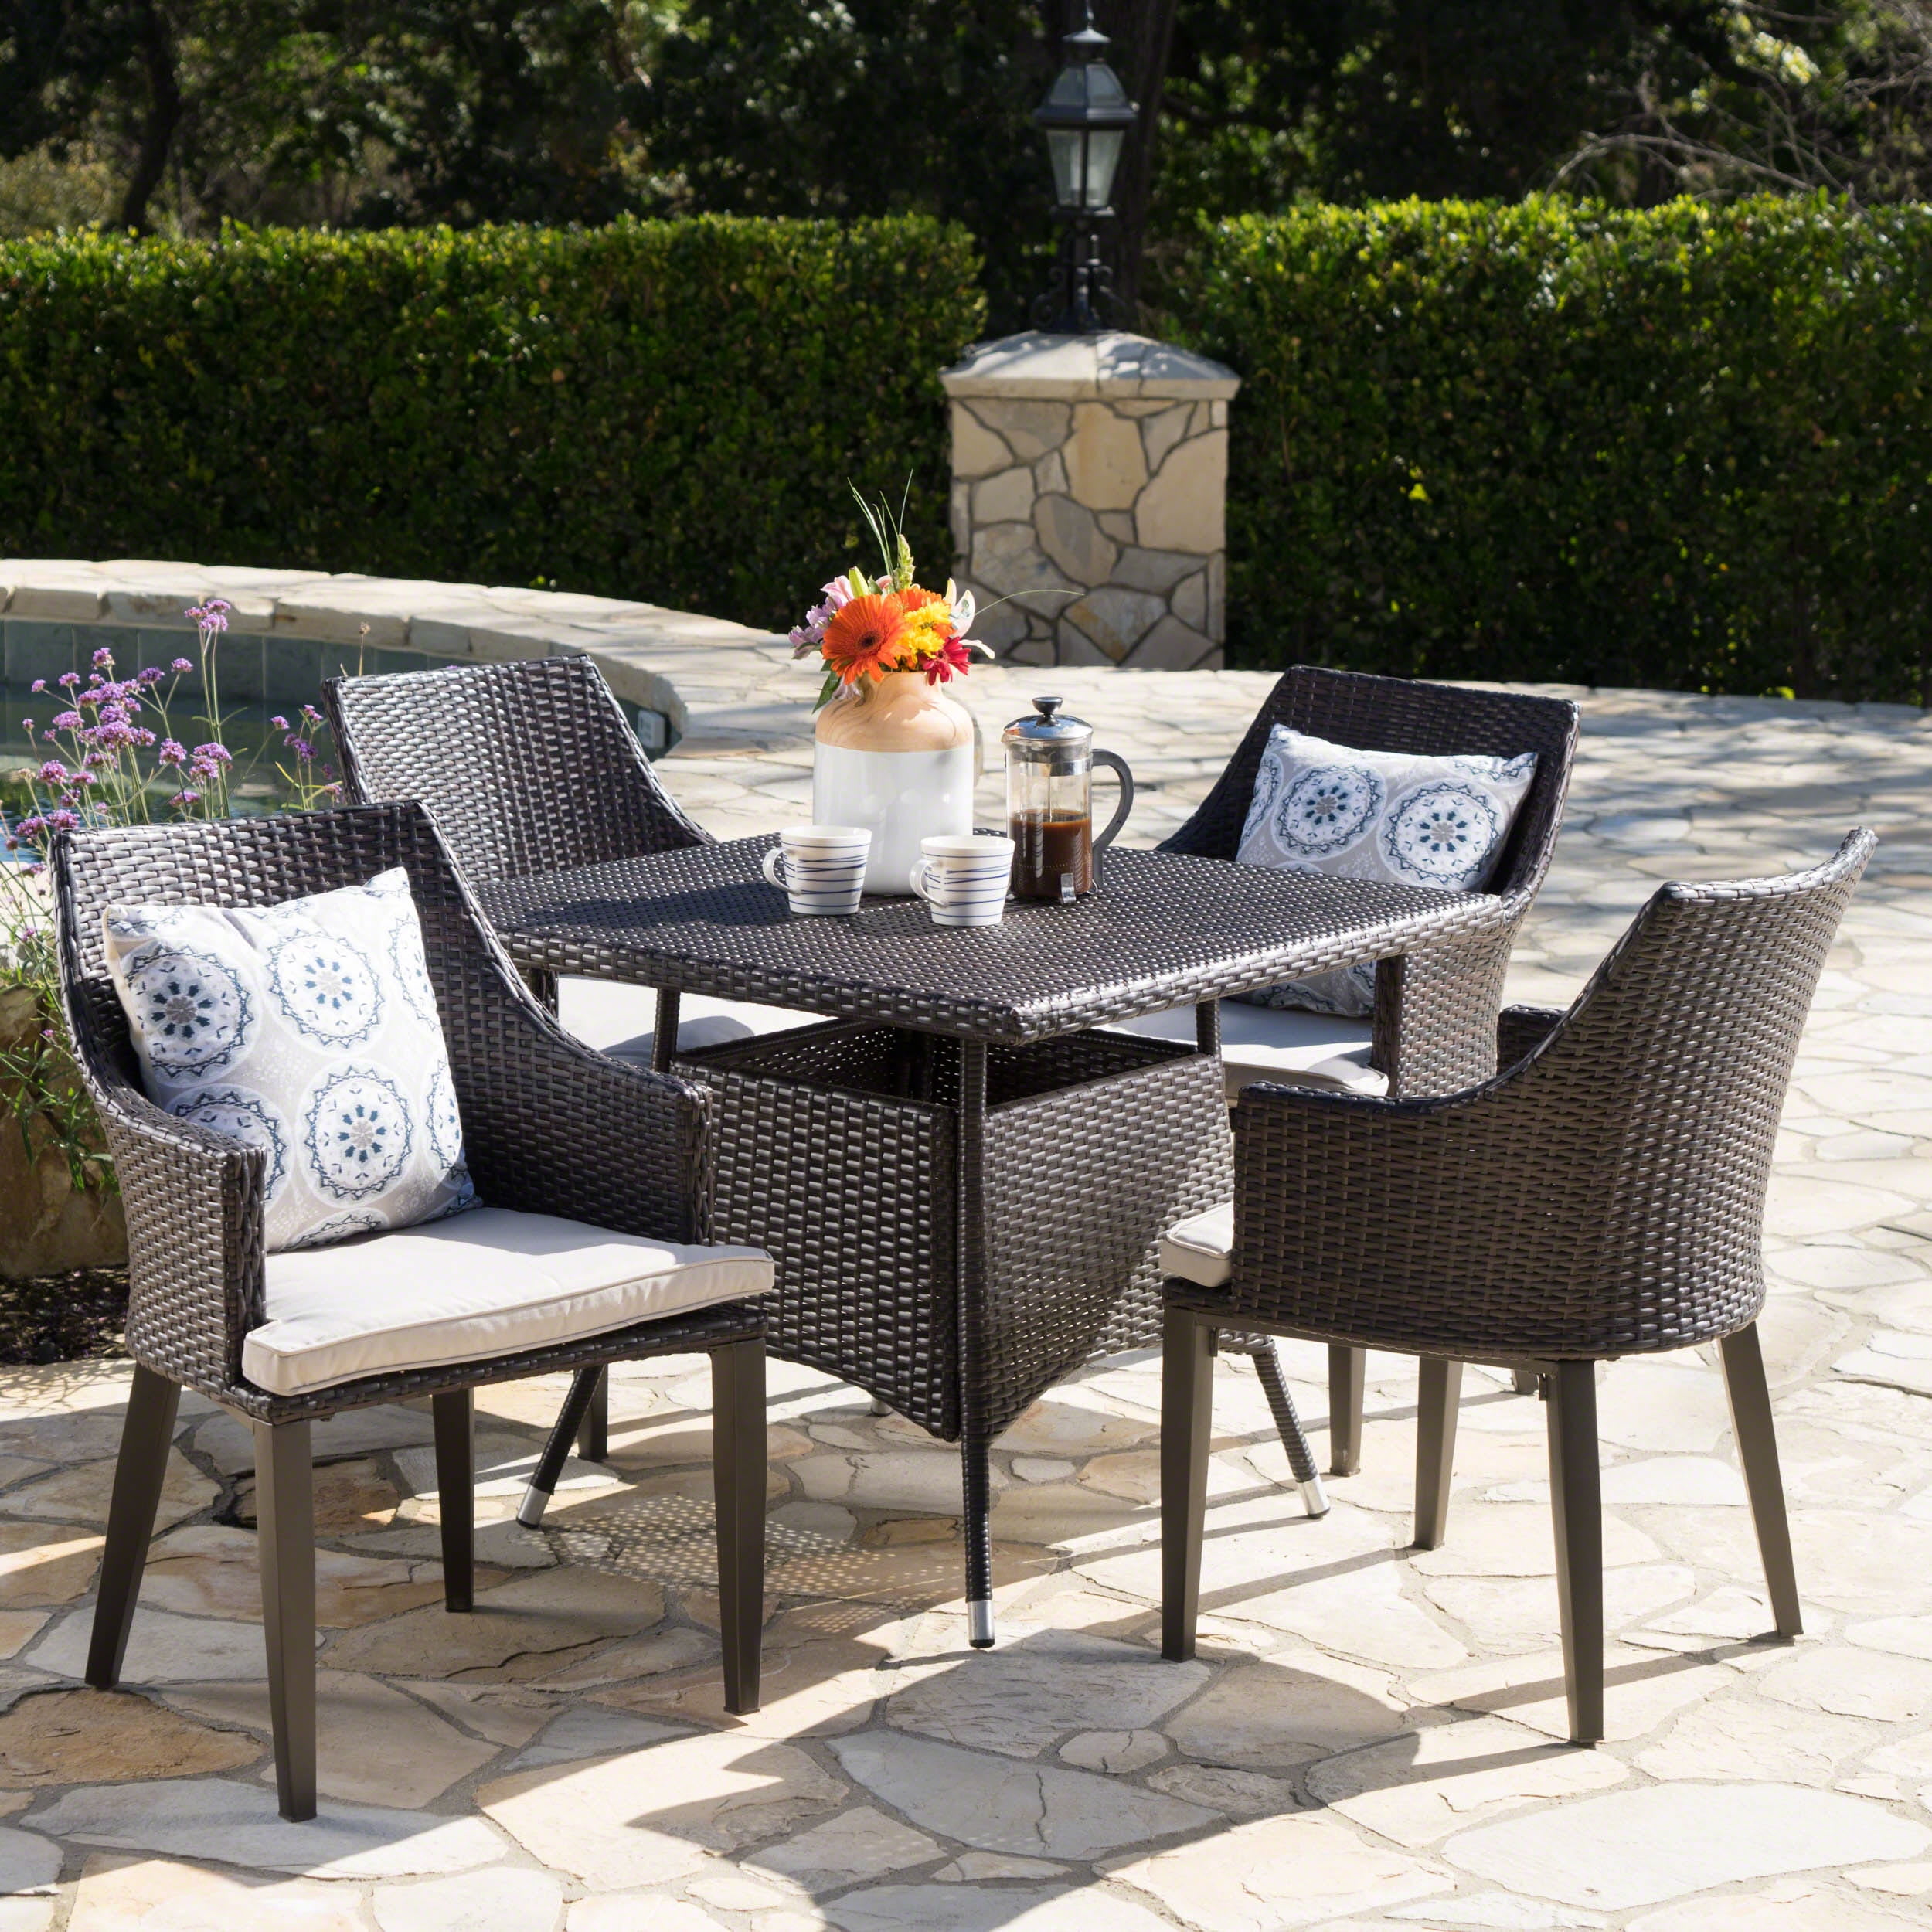 Hillsdale Outdoor 5 Piece Wicker Square Dining Set with Cushions